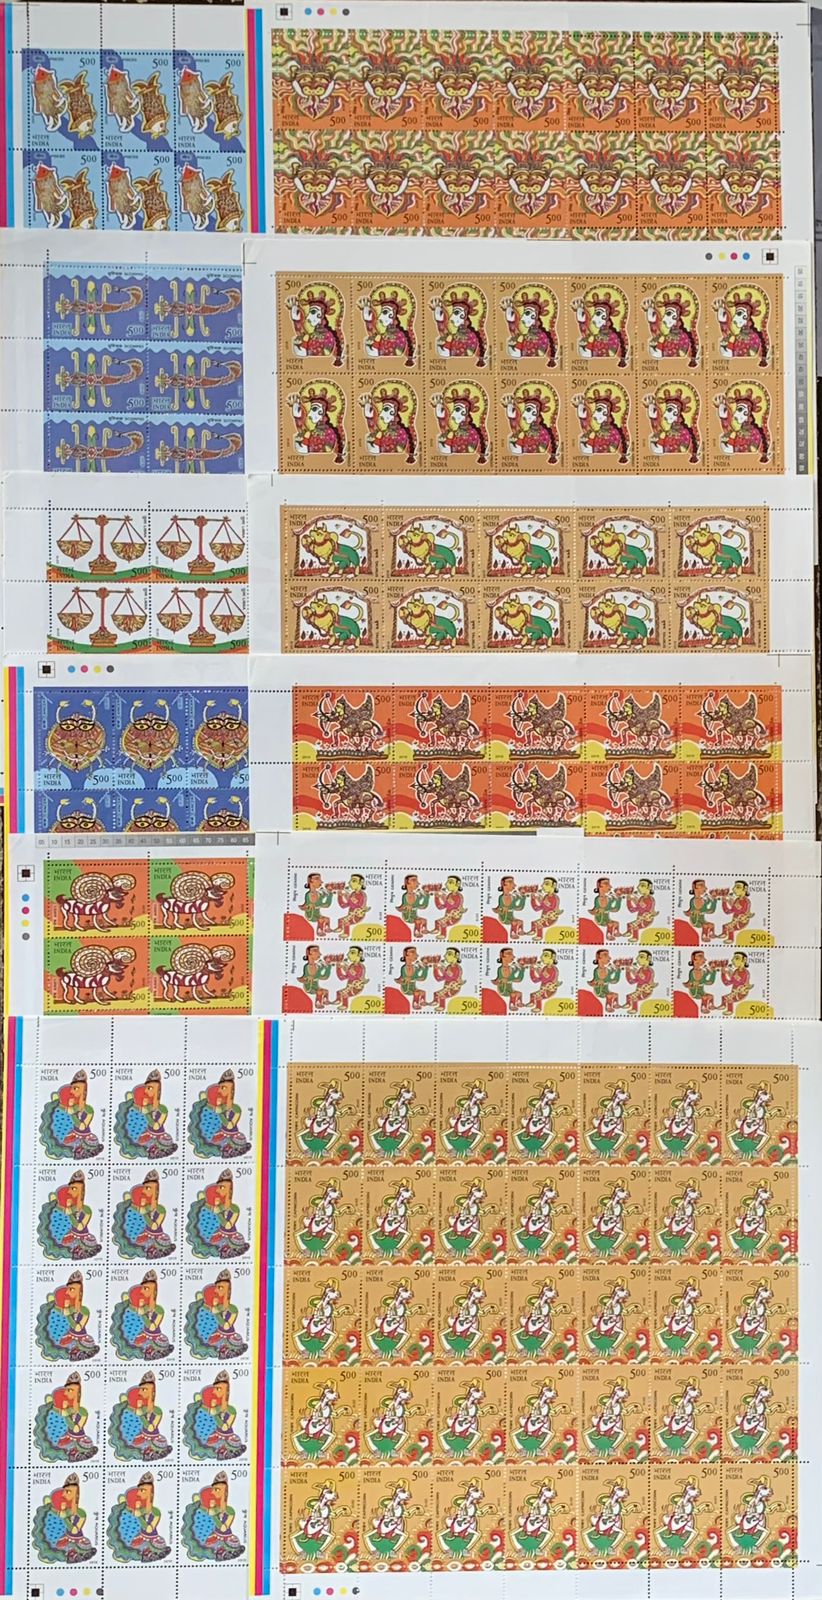 India 2010 Astrological Signs Set of 12 Full Sheet